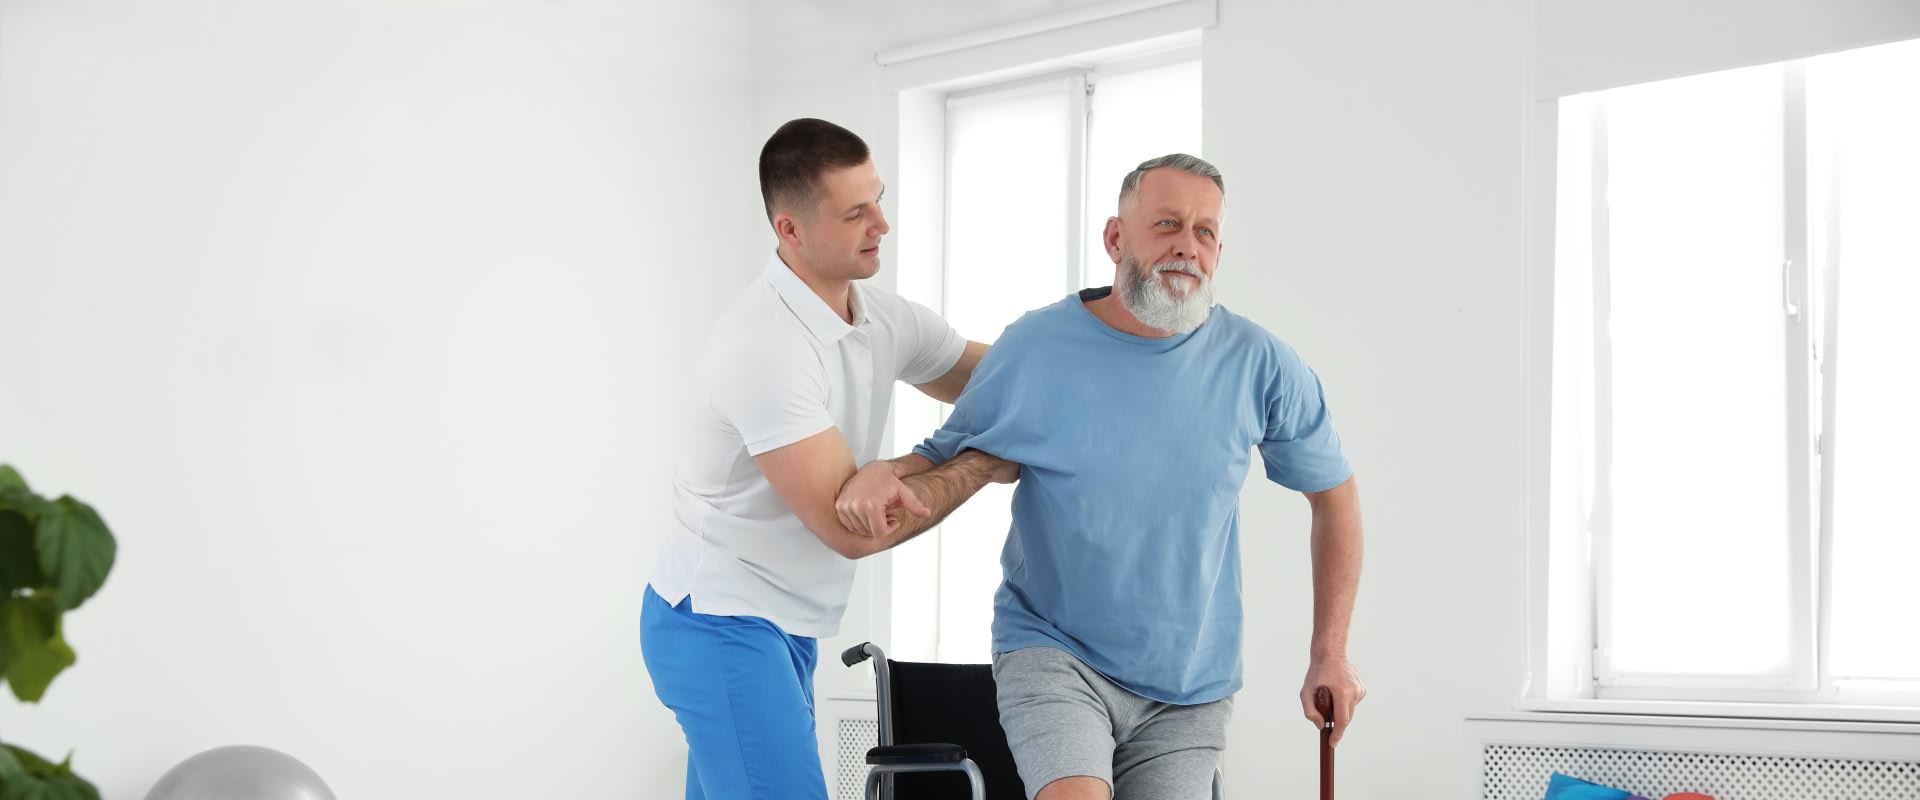 What is the main goal of rehabilitation?